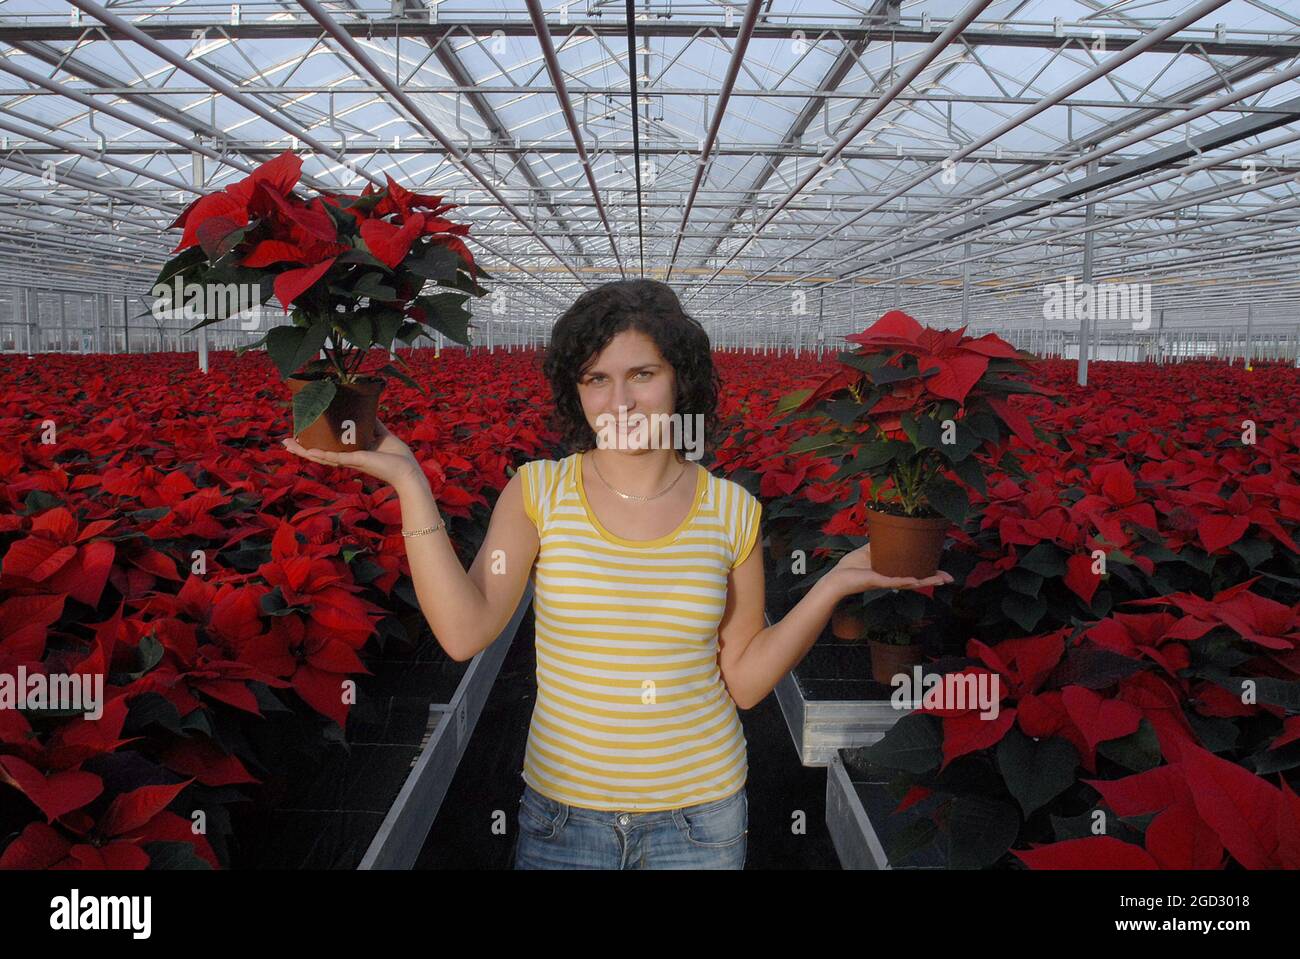 Ready for Christmas. Barbara Bachurska with some 0f the 100,000 Poinsettias bound for Sainsbury's  being grown at Rouindstone Nurseries near Chichester , West Sussex. Pic Mike Walker, 2008 Stock Photo